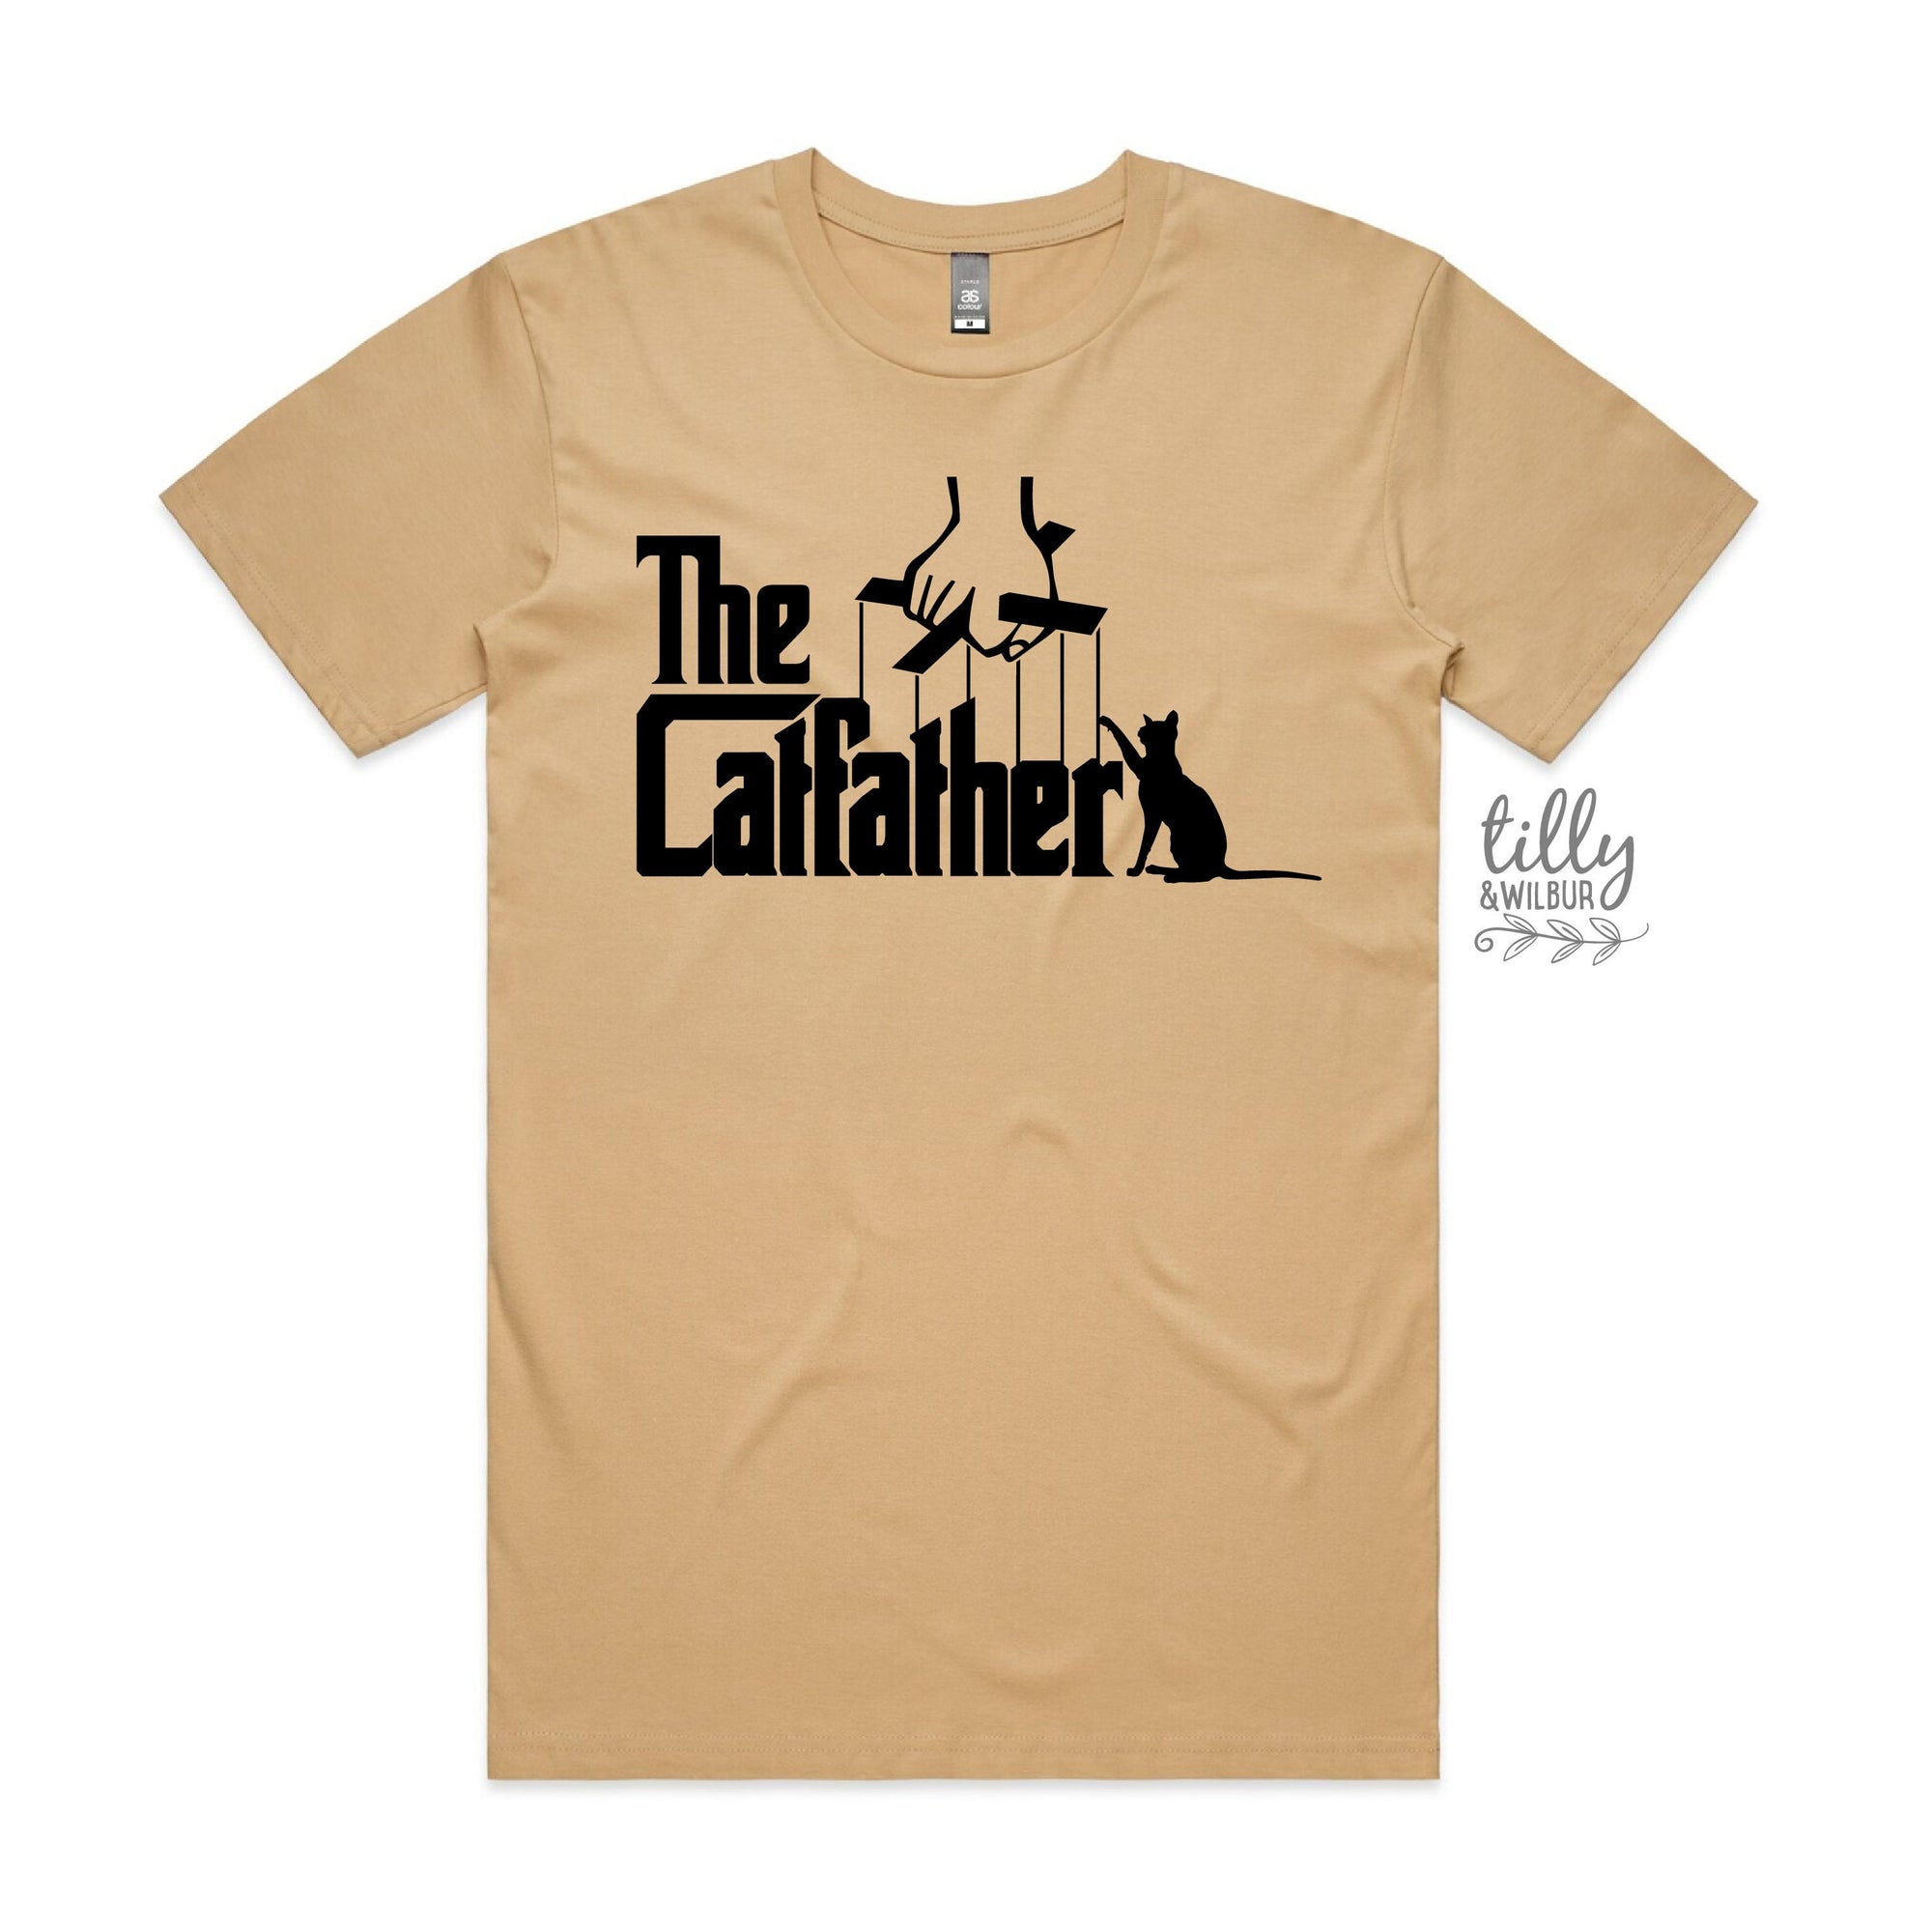 The Catfather T-Shirt, Cat T-Shirt, Funny Cat T-Shirt, Kitty Shirt, Kitten T-Shirt, I Love Cats T-Shirt, Animal Lover, Funny Men's T-Shirt